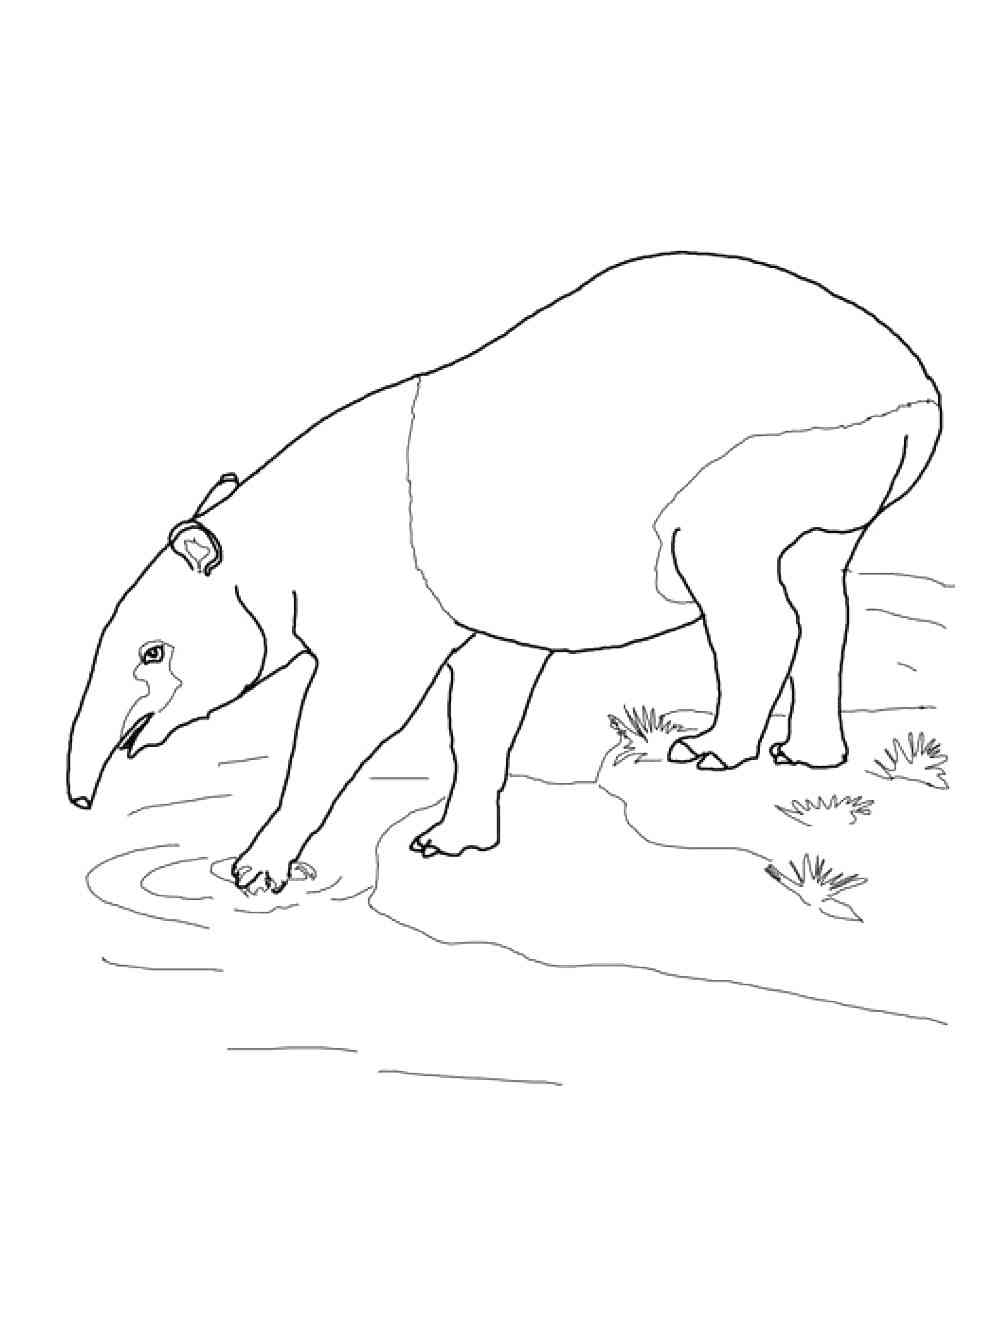 Tapir by the River coloring page